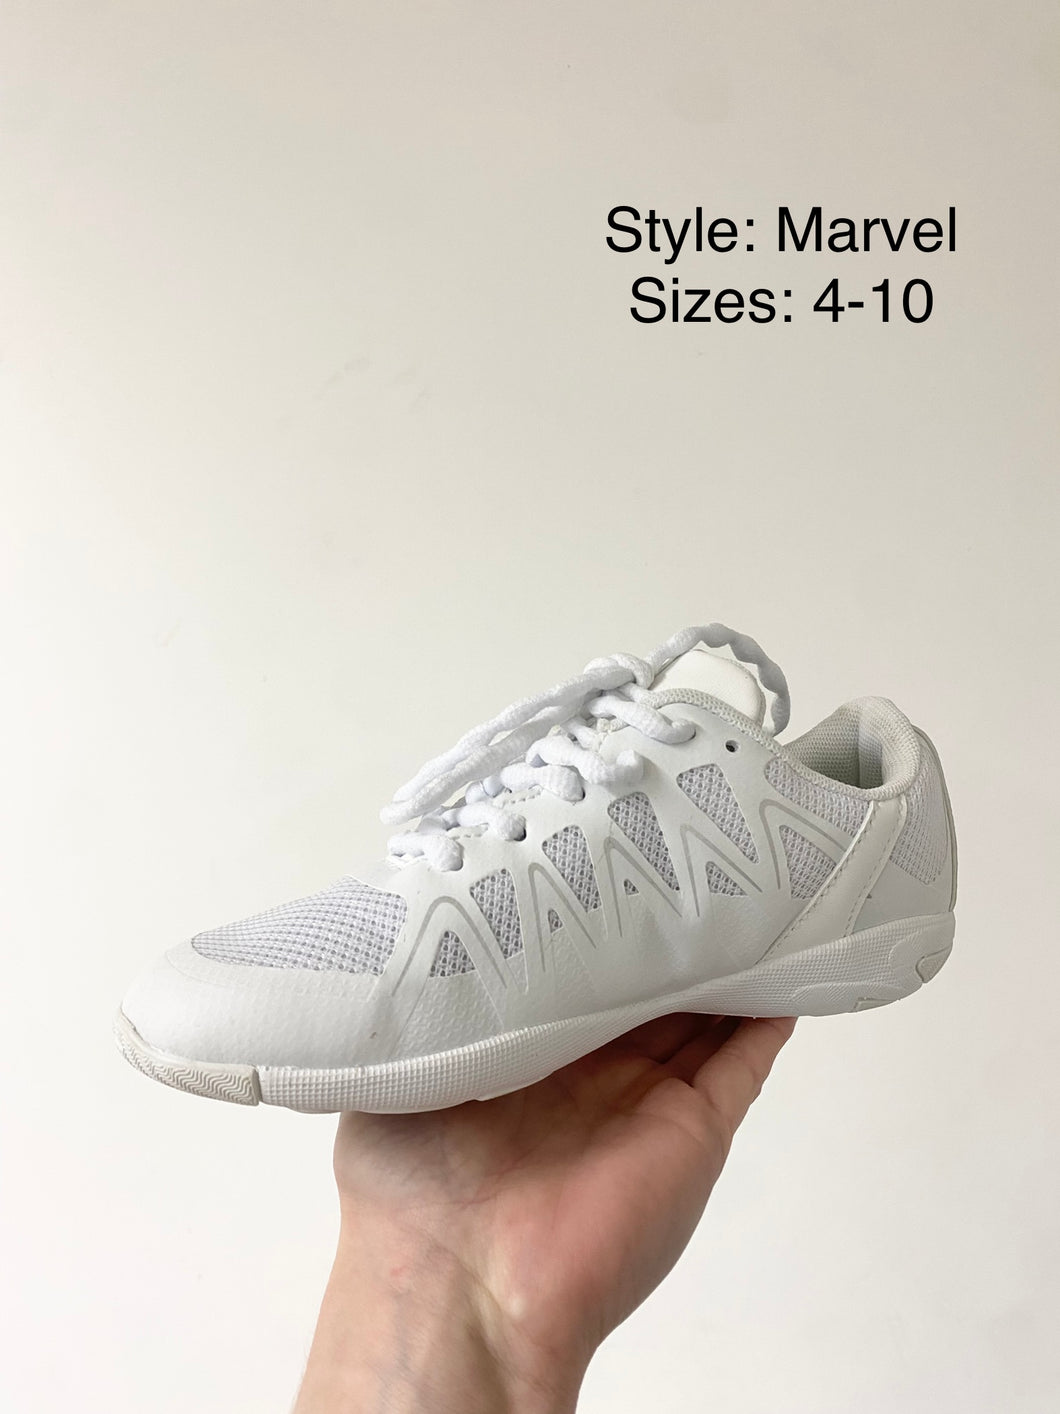 Nfinity Flyte Cheer Shoes White Size 6.5 - $100 (23% Off Retail) - From  carissa